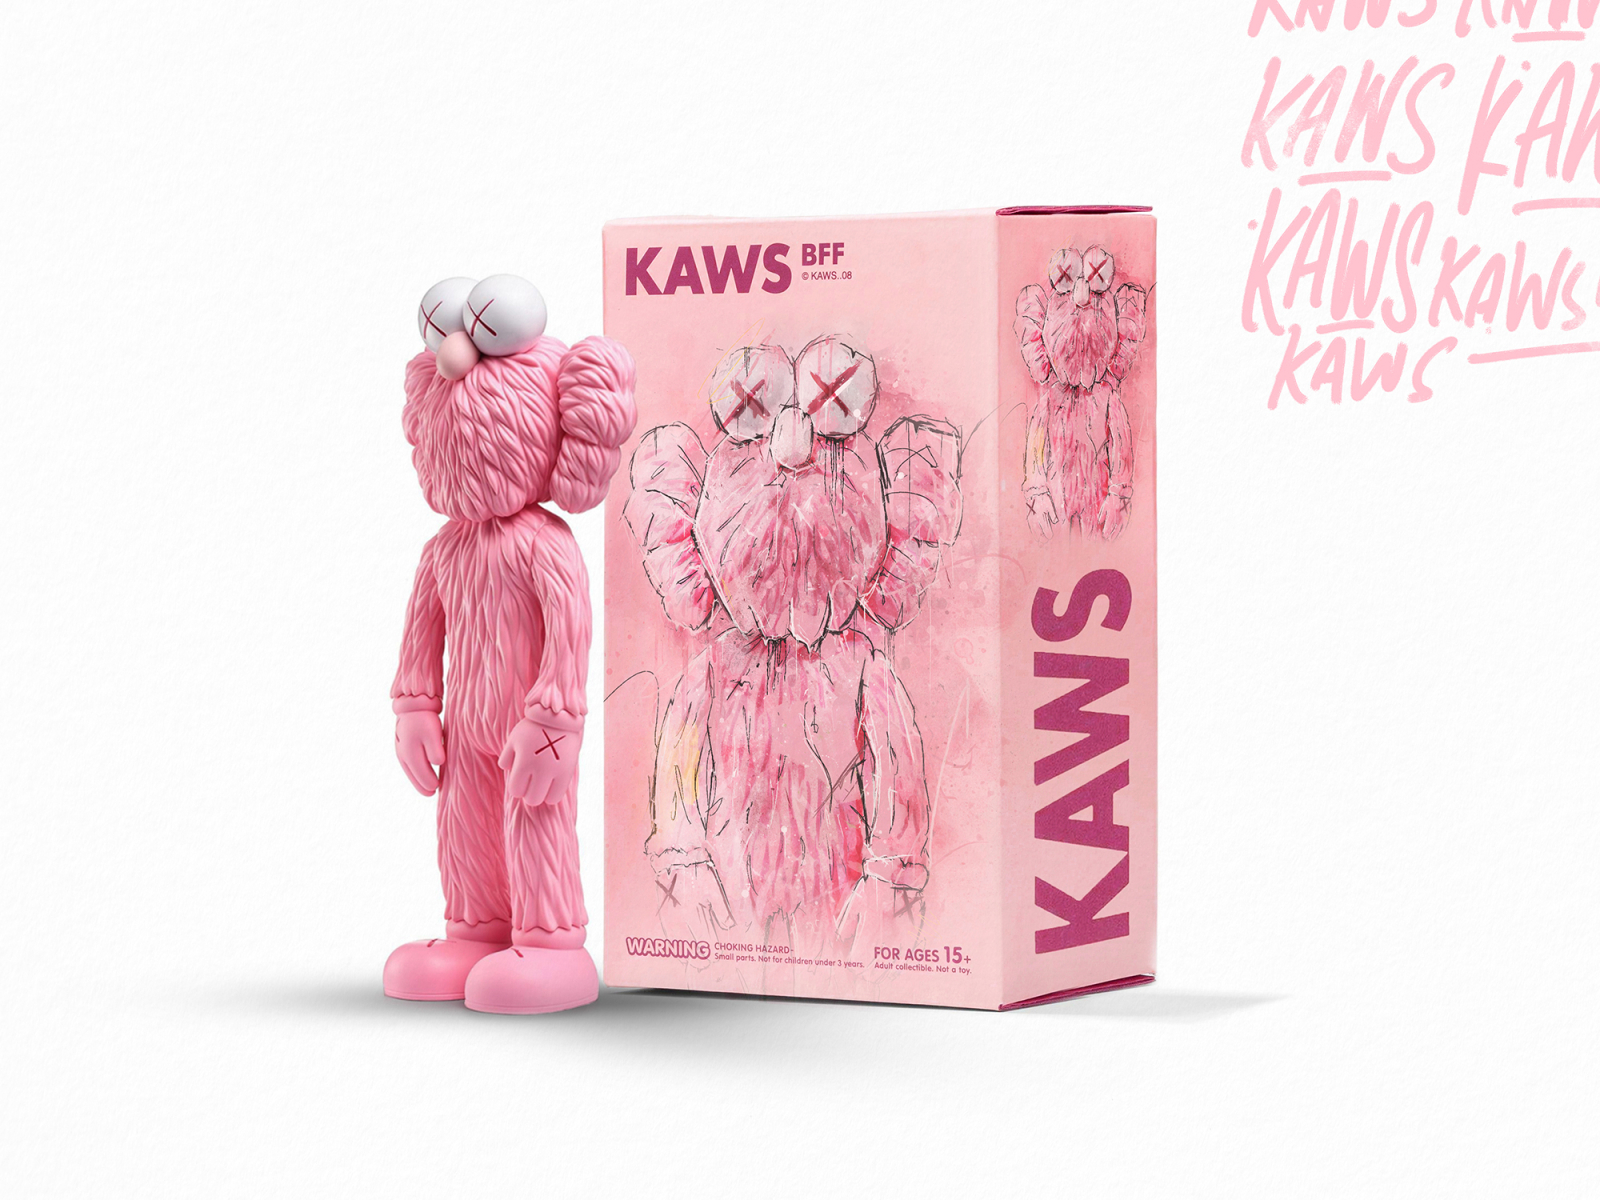 KAWS BFF Pink Edition Packaging by Cameron Humphries on Dribbble